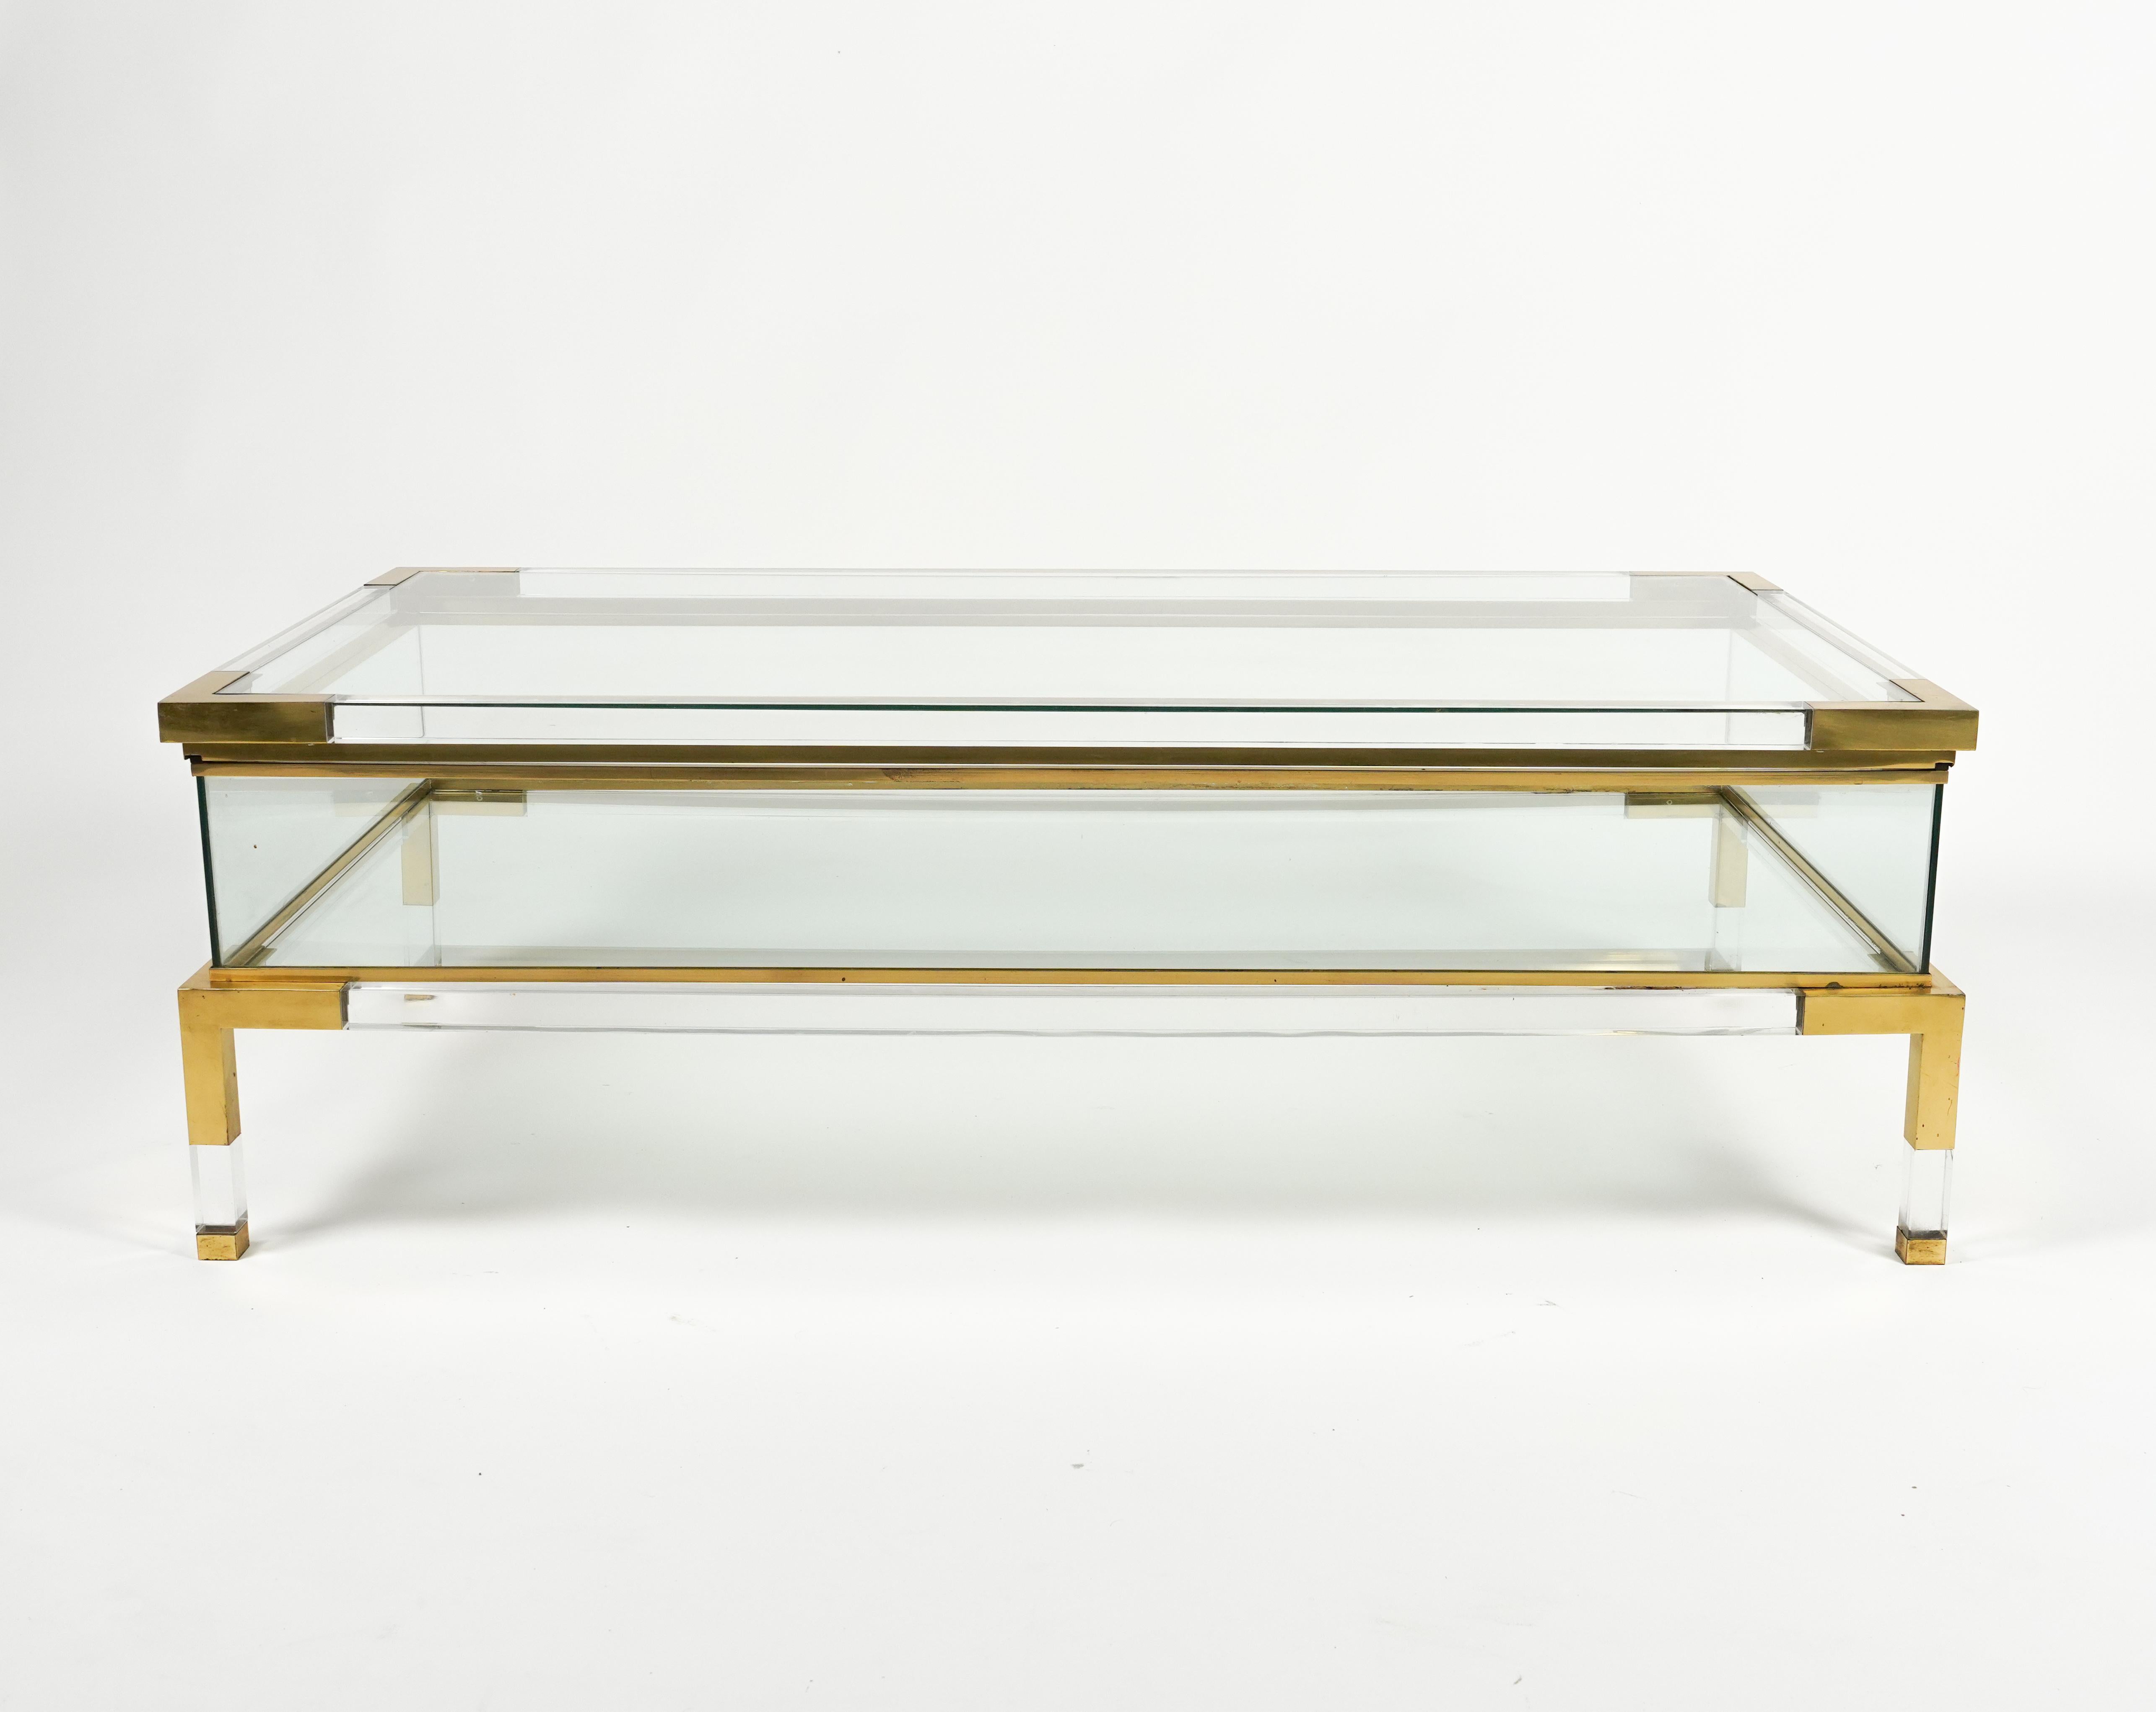 Midcentury Coffee Table in Lucite, Brass & Glass by Maison Jansen, France 1970s For Sale 5